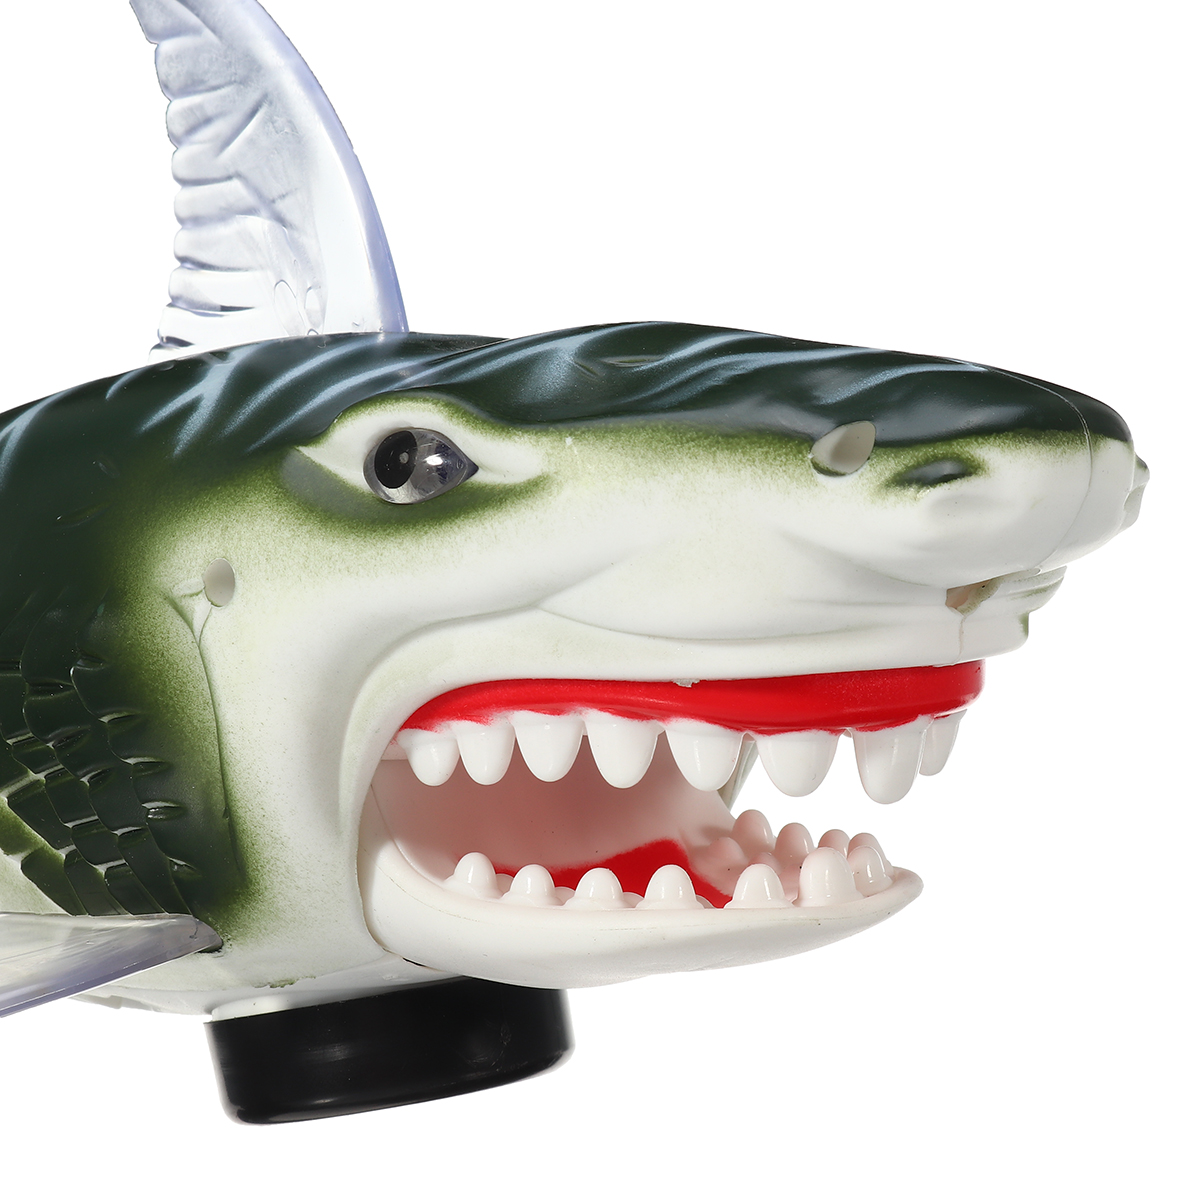 Electric-Projection-Light-Sound-Shark-Walking-Animal-Educational-Toys-for-Kids-Gift-1678213-7